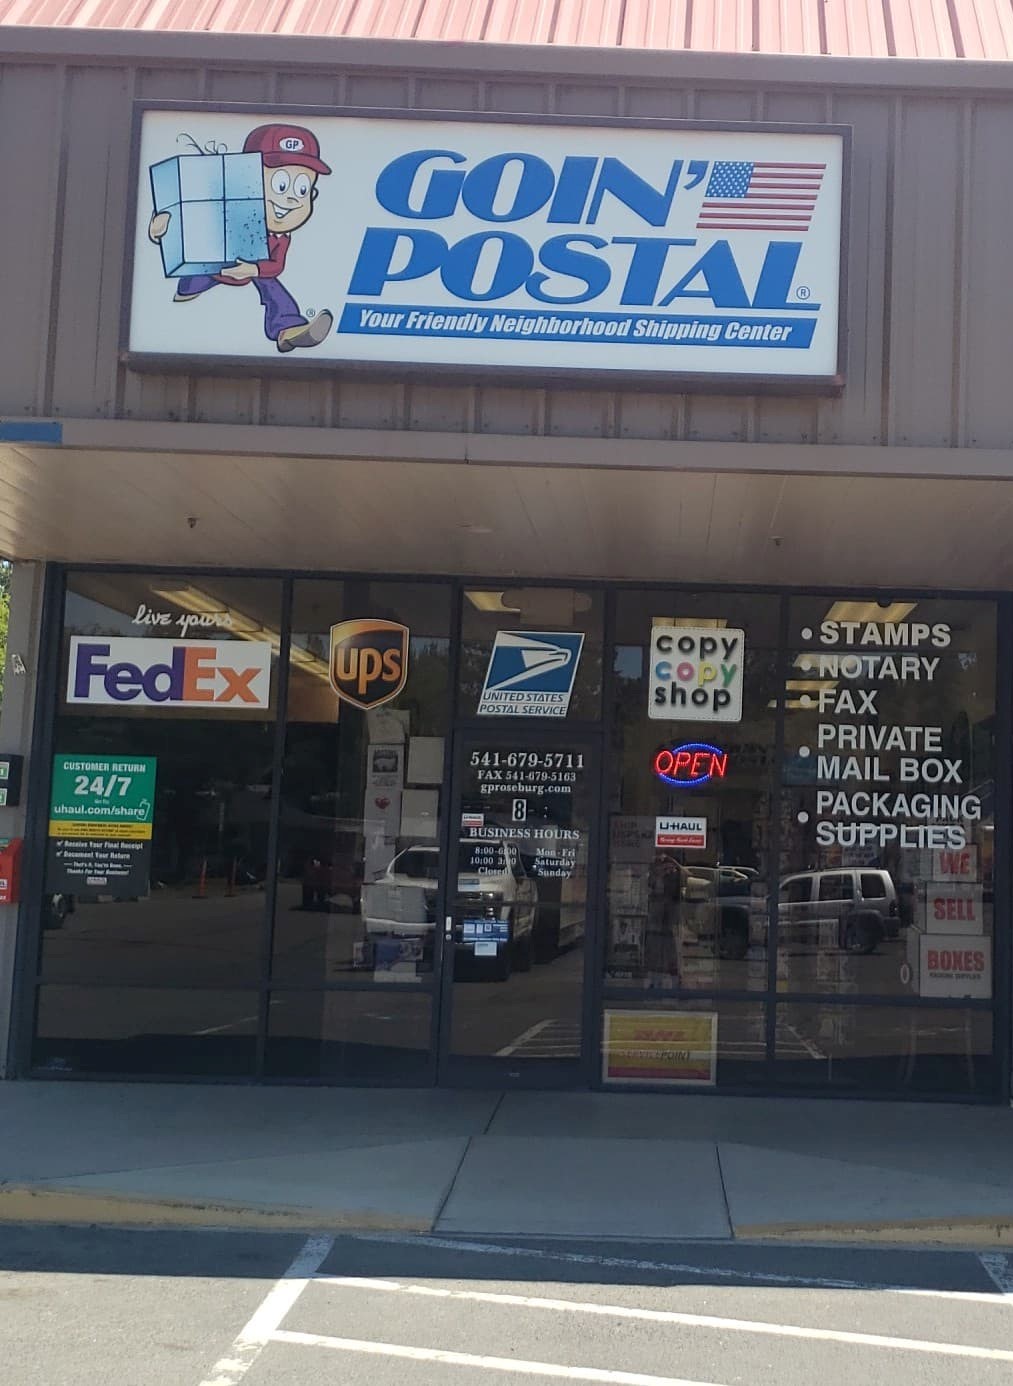 Goin' Postal business and shipping services storefront on Carnes Rd in Green, OR